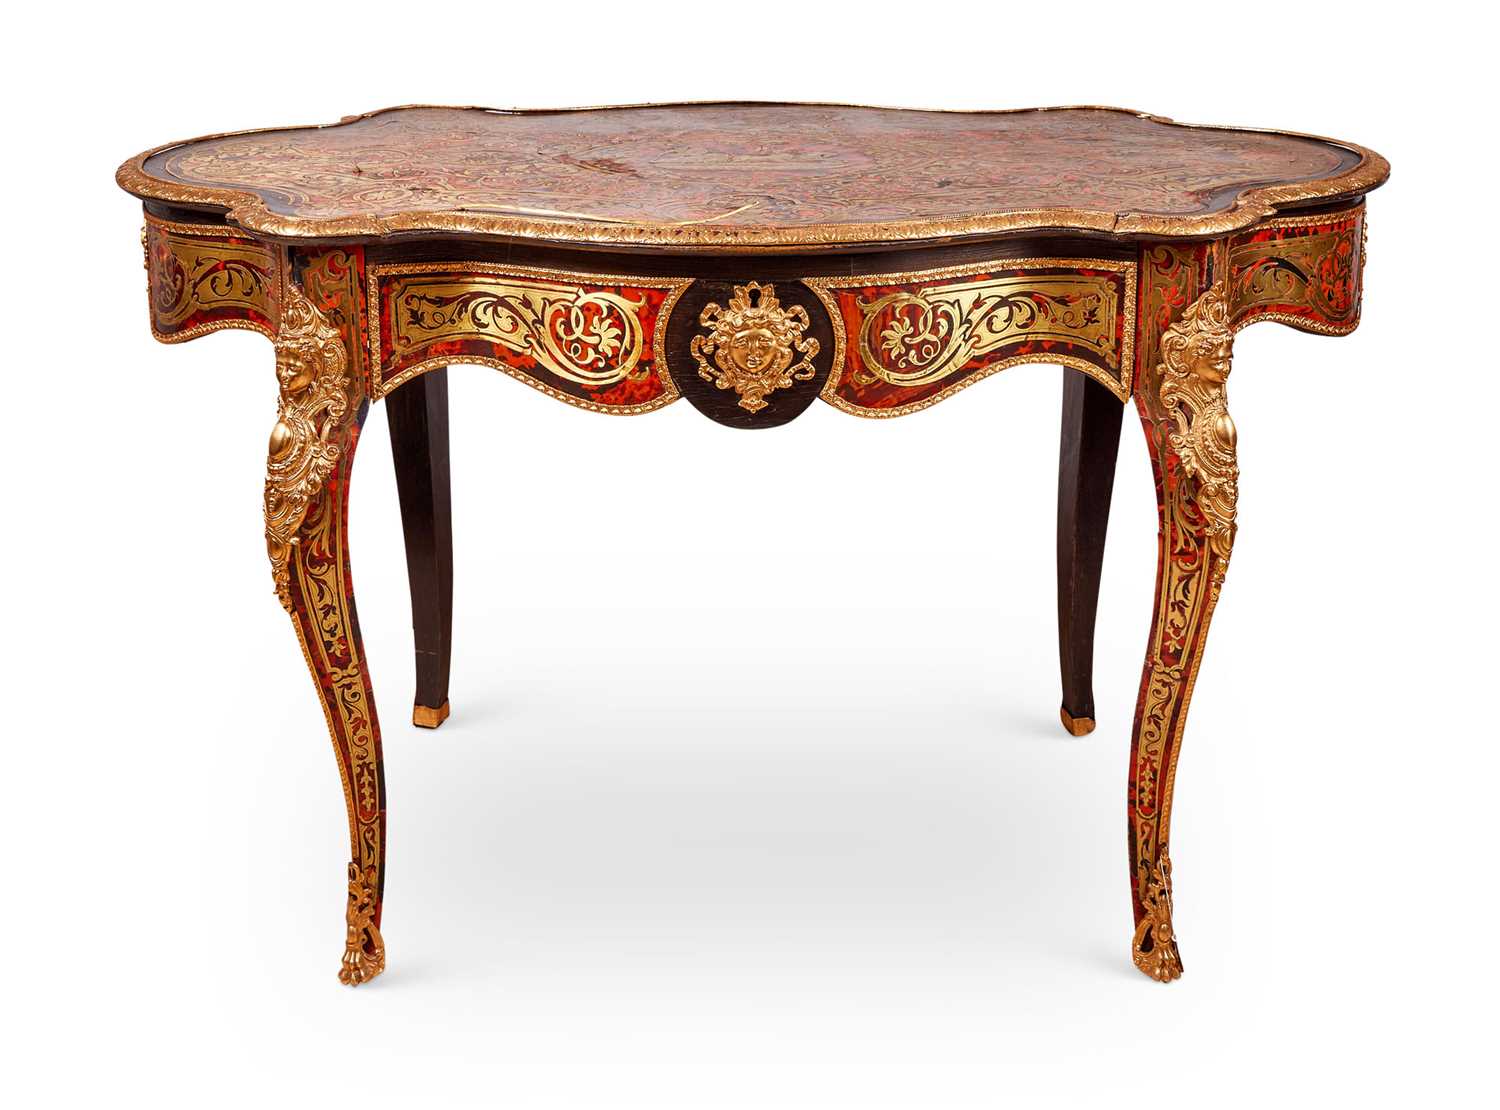 A FINE 19TH CENTURY FRENCH BOULLE STYLE CUT BRASS, ORMOLU MOUNTED AND TORTOISESHELL TABLE